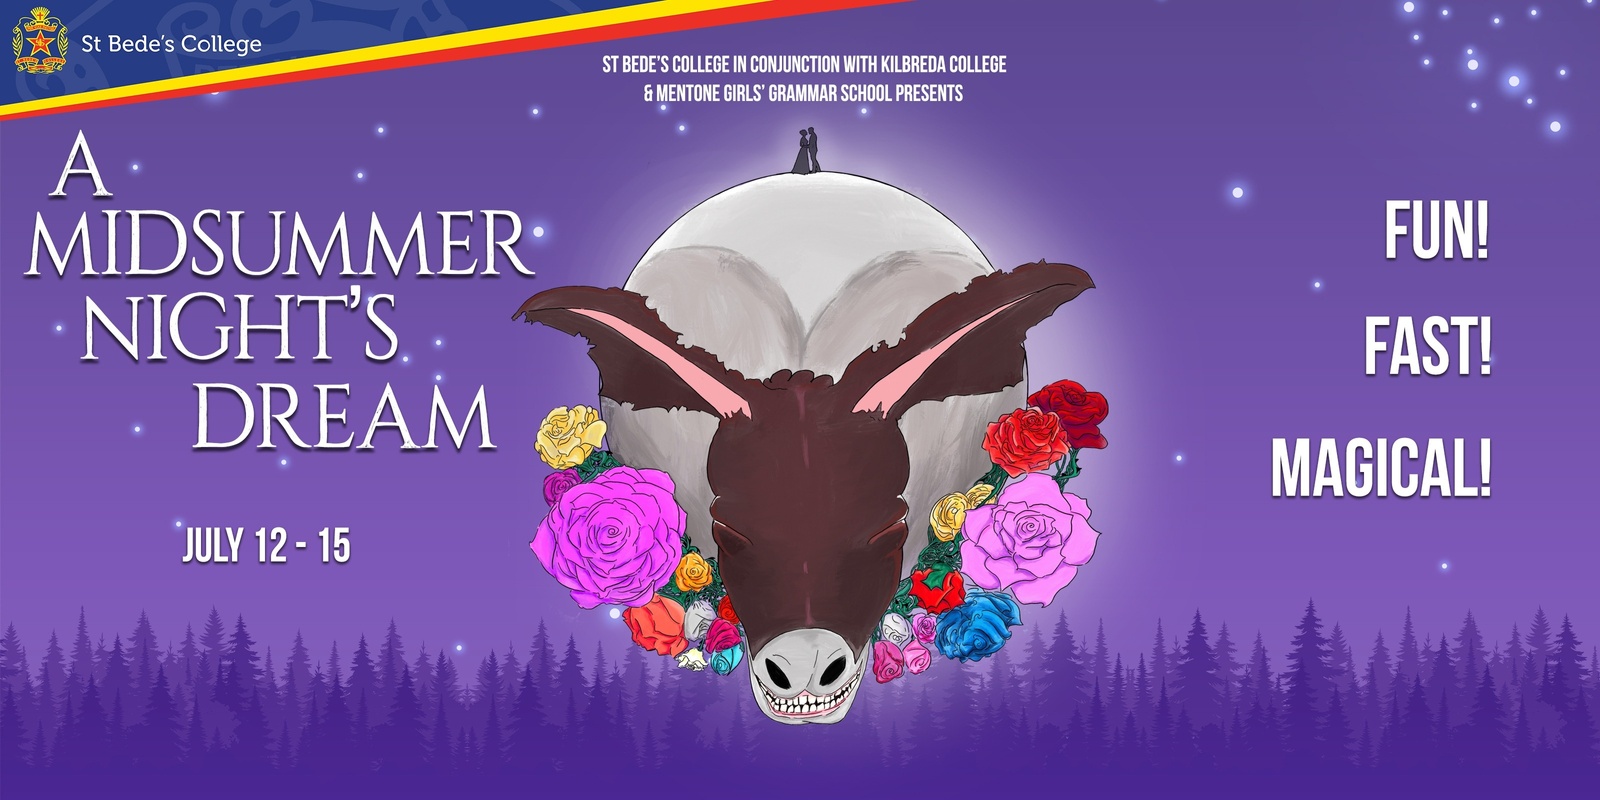 a-midsummer-night-s-dream-presented-by-st-bede-s-college-2023-humanitix